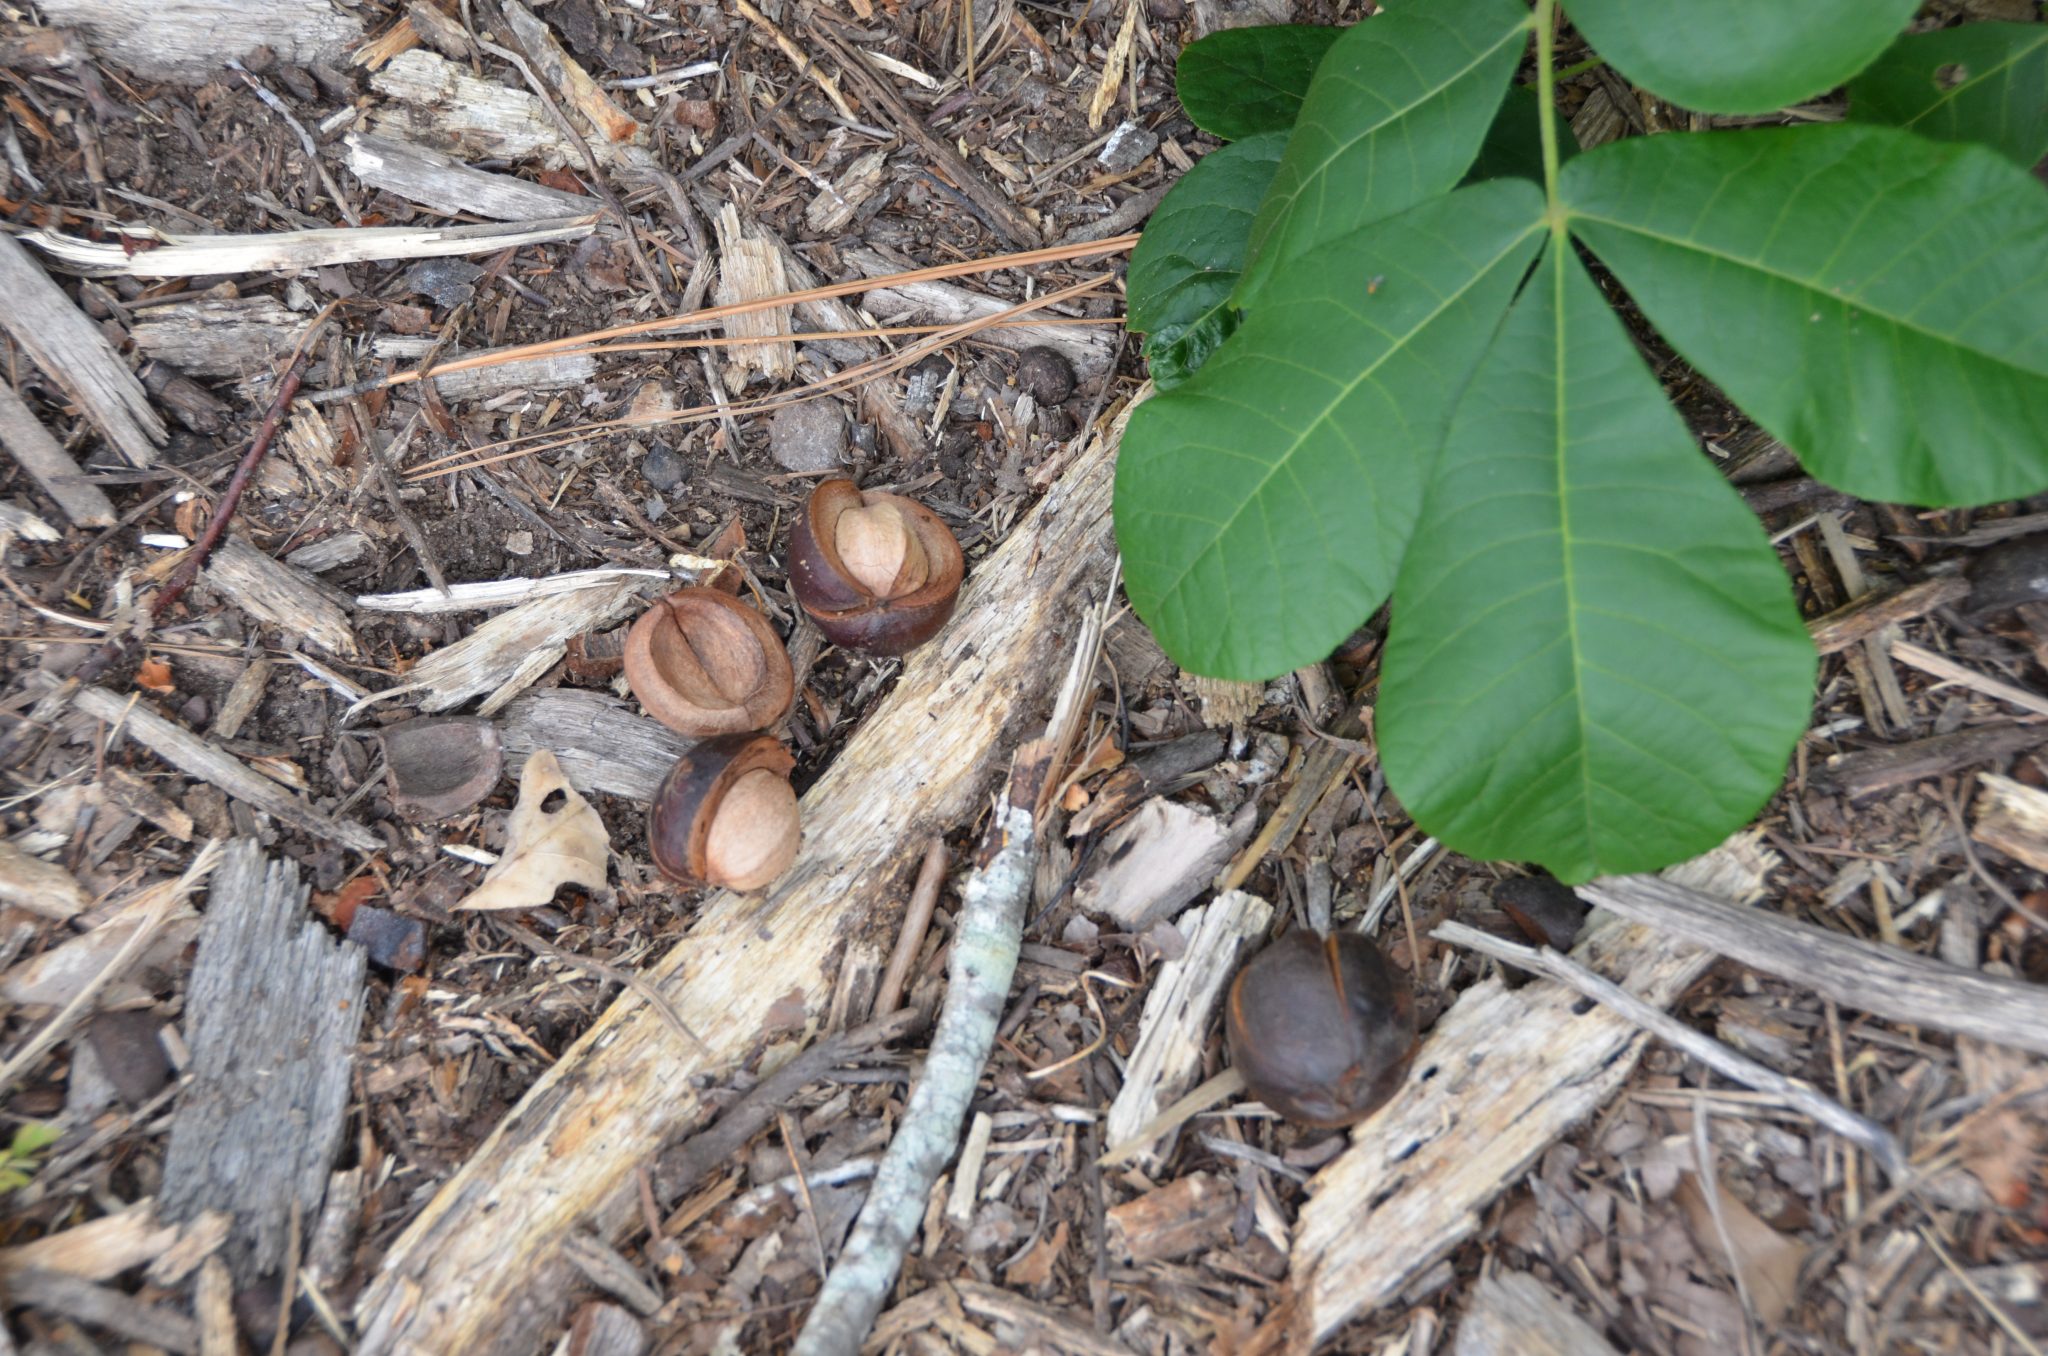 Hickory nuts. Hickory nuts have hard shells surrounded by a woody husk.